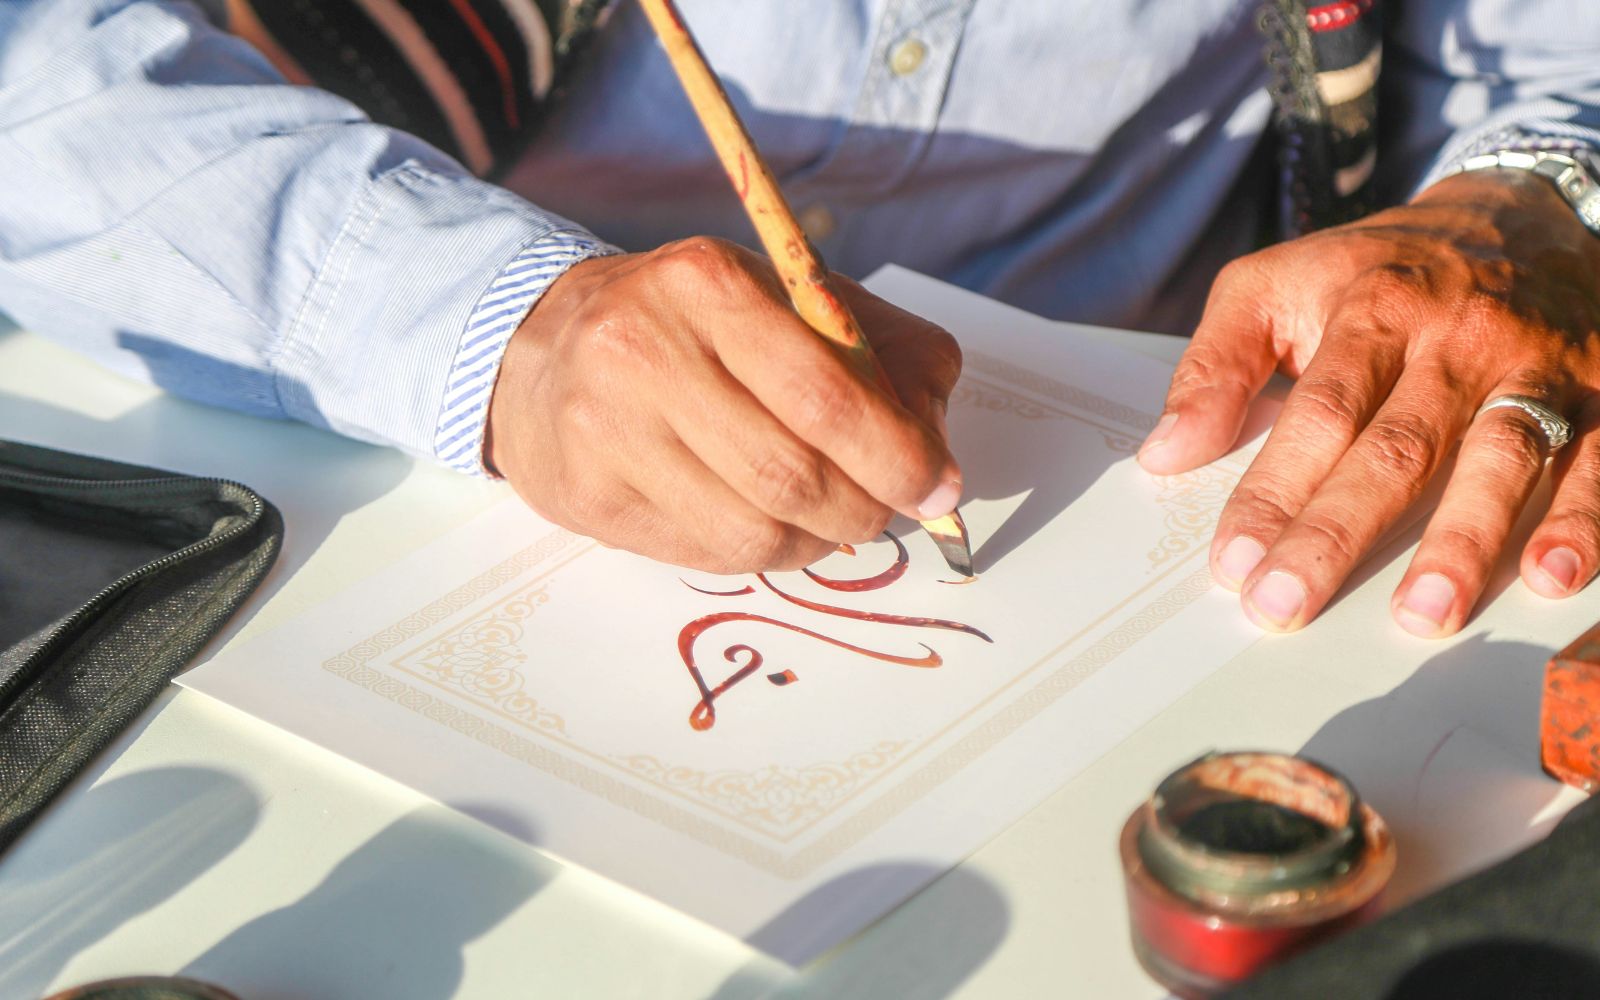 Personalized Calligraphy Business Slogans.